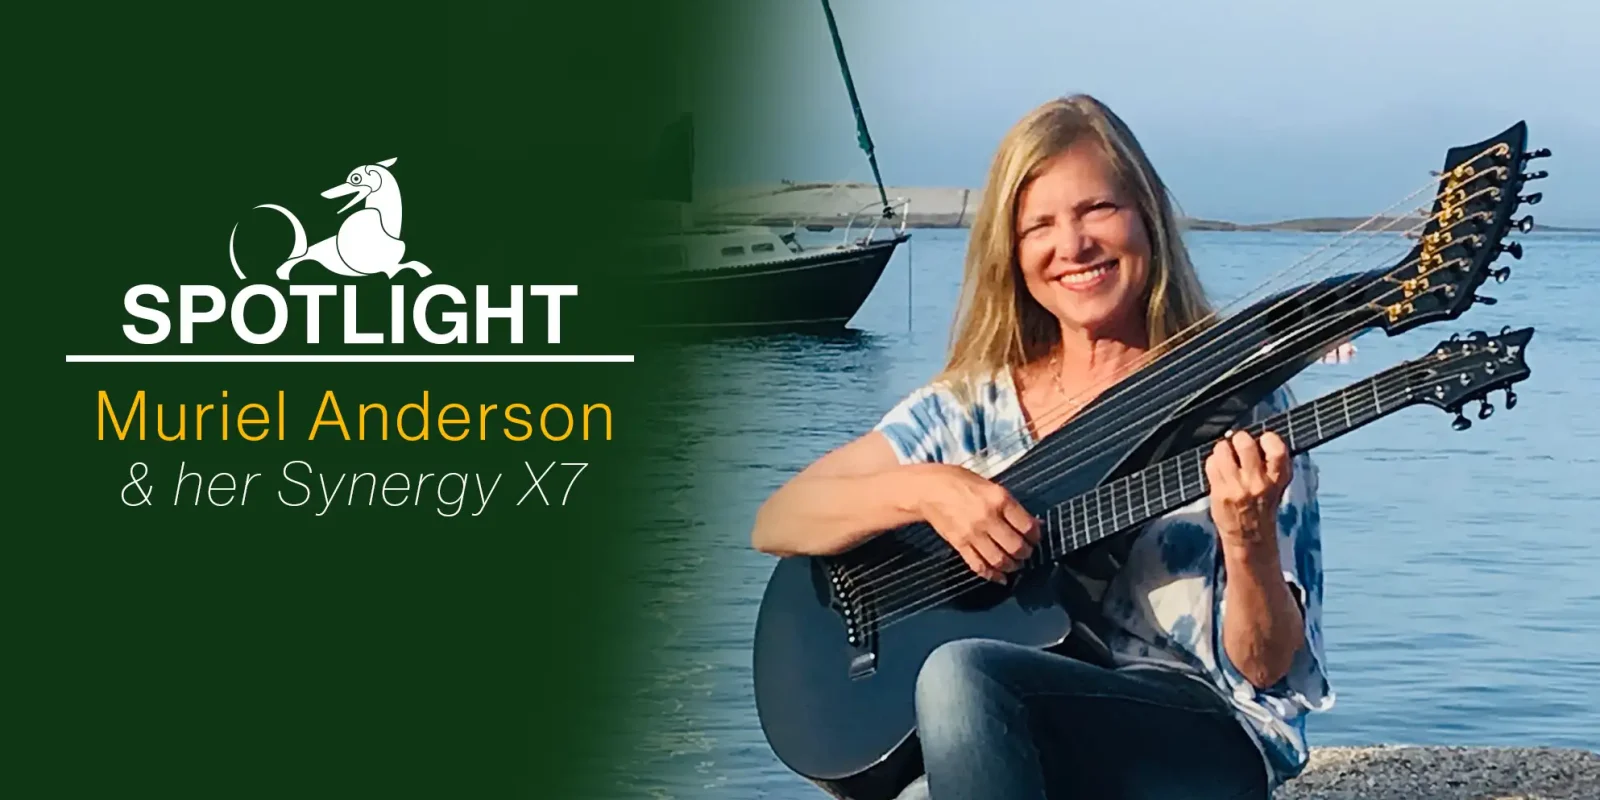 Muriel Anderson and her Emerald synergy X7